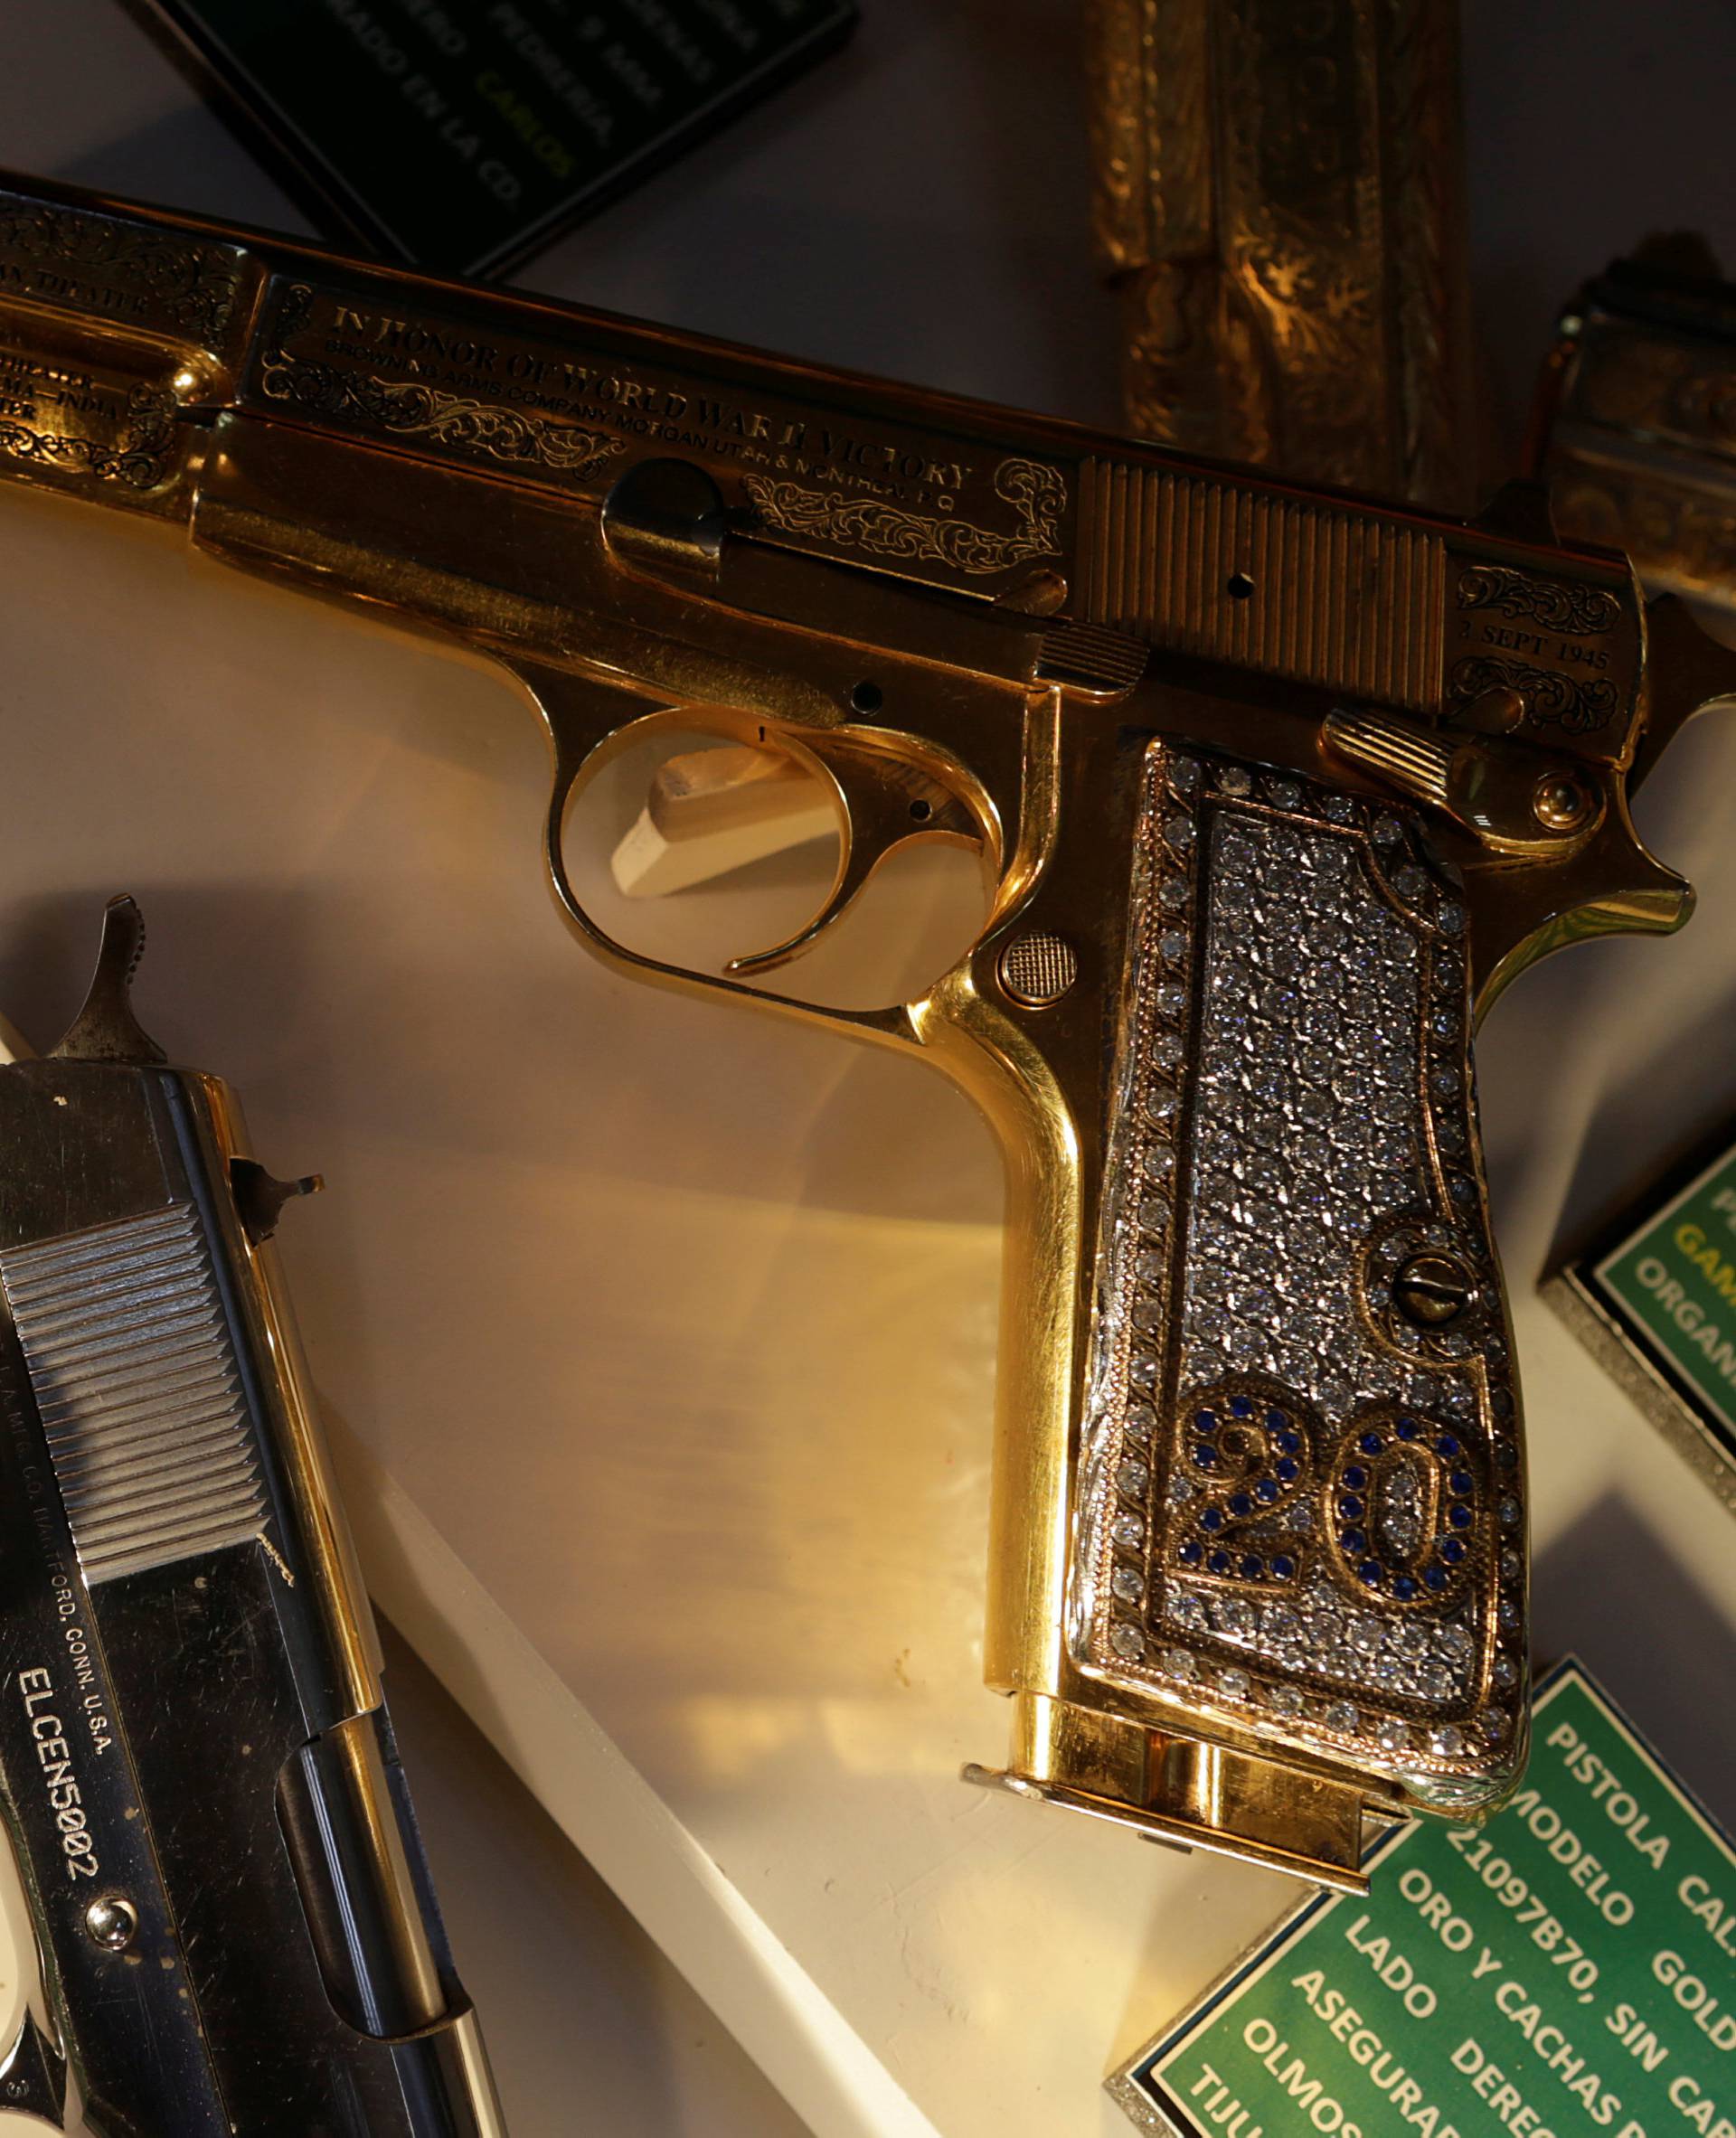 Guns decorated with gold and jewellery are displayed in the Drugs Museum, used by the military to showcase to soldiers the lifestyles of Mexican drug lords, at the headquarters of the Ministry of Defense in Mexico Cit